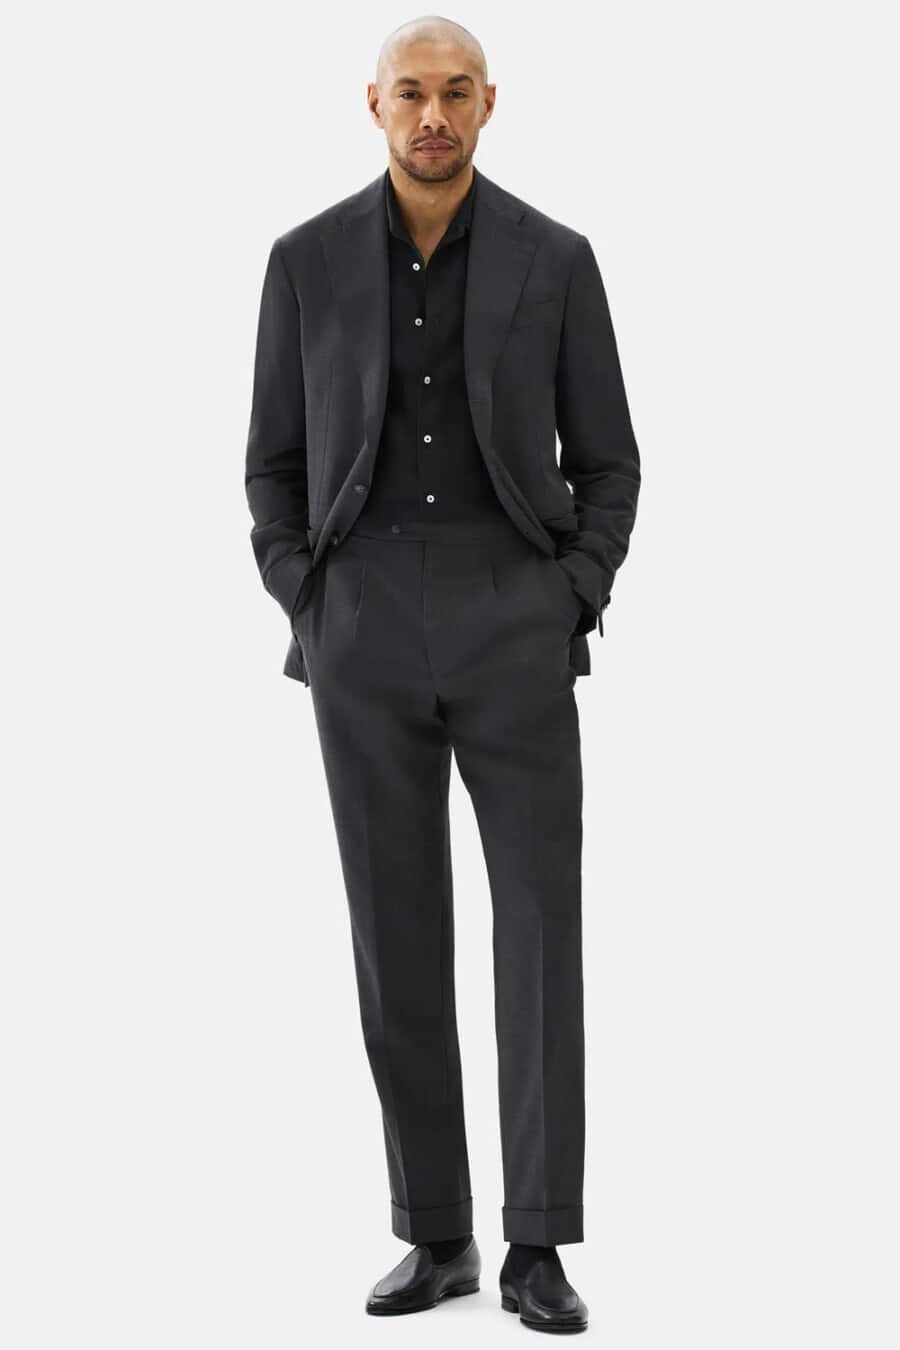 Men's black suit, black shirt and black Belgian loafers outfit